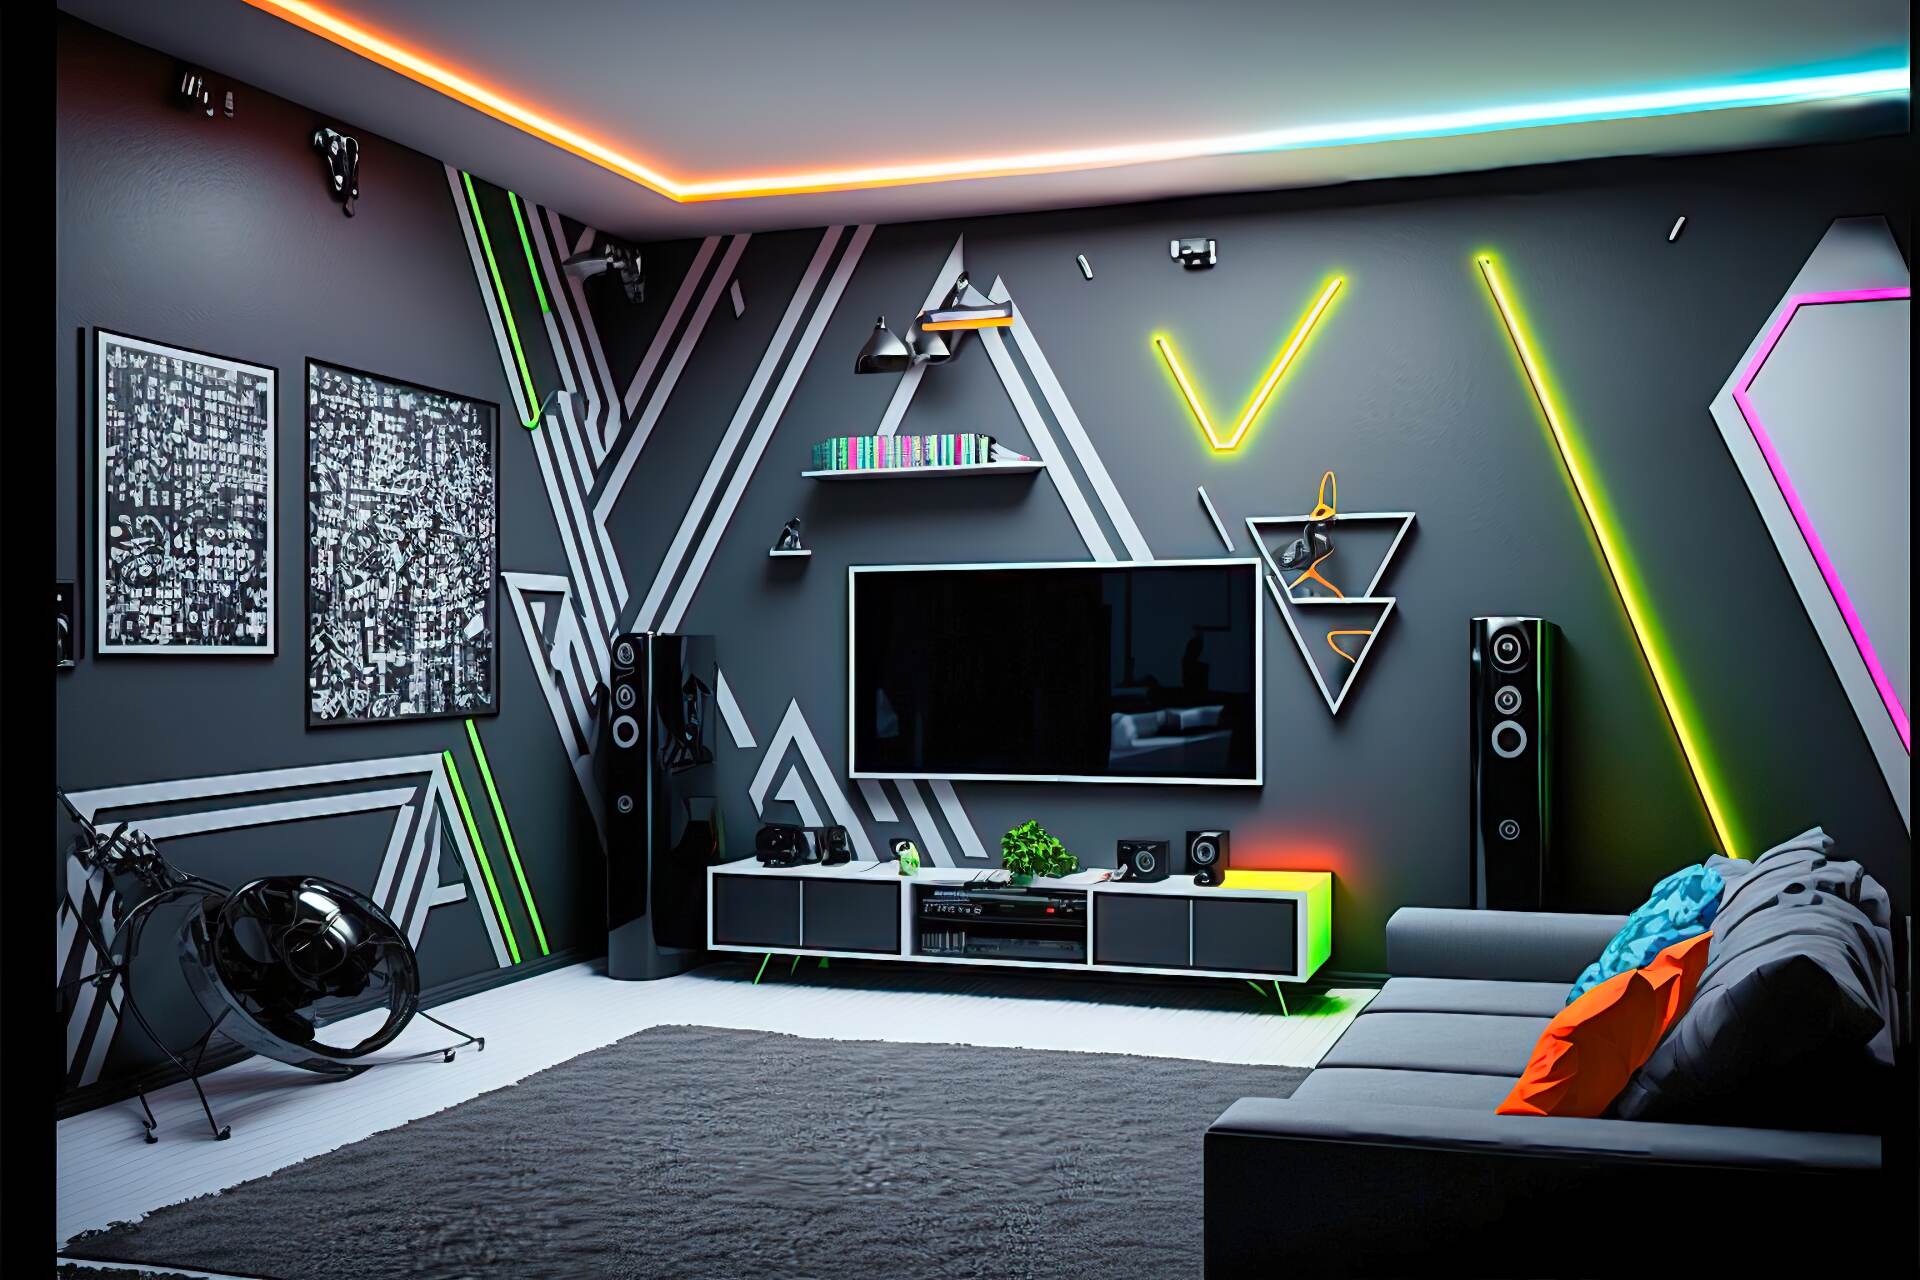 A Cyberpunk-Style Living Room With A Neon Nexus Vibe. The Walls Are Painted Black And Adorned With Neon Lights In Various Shapes And Colors. The Furniture Is Made Up Of Angular And Geometric Pieces In A Monochromatic Color Scheme Of Black And Silver. A Large Flat Screen Tv Is Mounted On The Wall, Surrounded By More Neon Lights. A High-Tech Sound System And A Holographic Gaming Console Complete The Look.